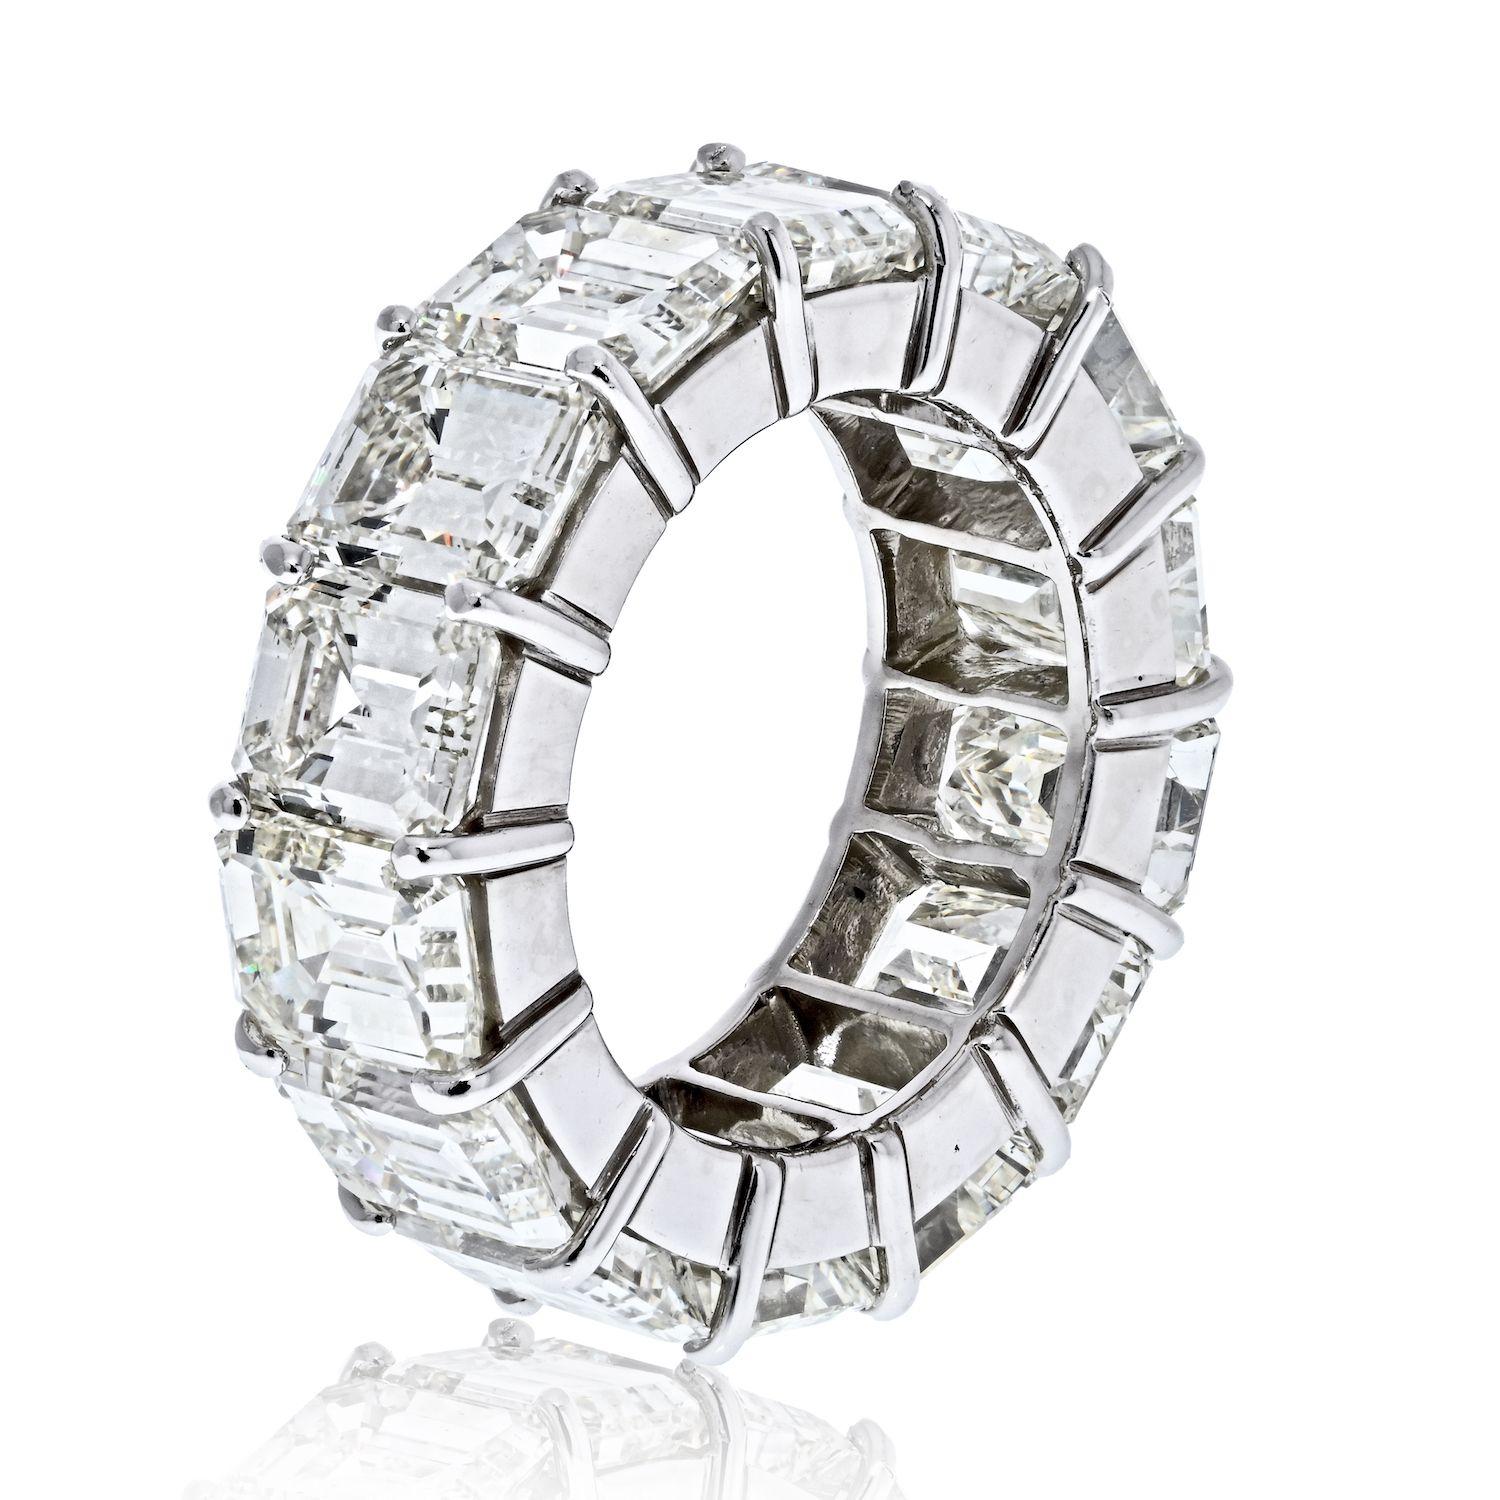 Eternity bands are meaningful and beautiful jewelry items. These rings are commonly used as a wedding band, anniversary band, or for other very special occasions. This is a handmade diamond eternity band crafted in Platinum, mounted with 14 diamonds